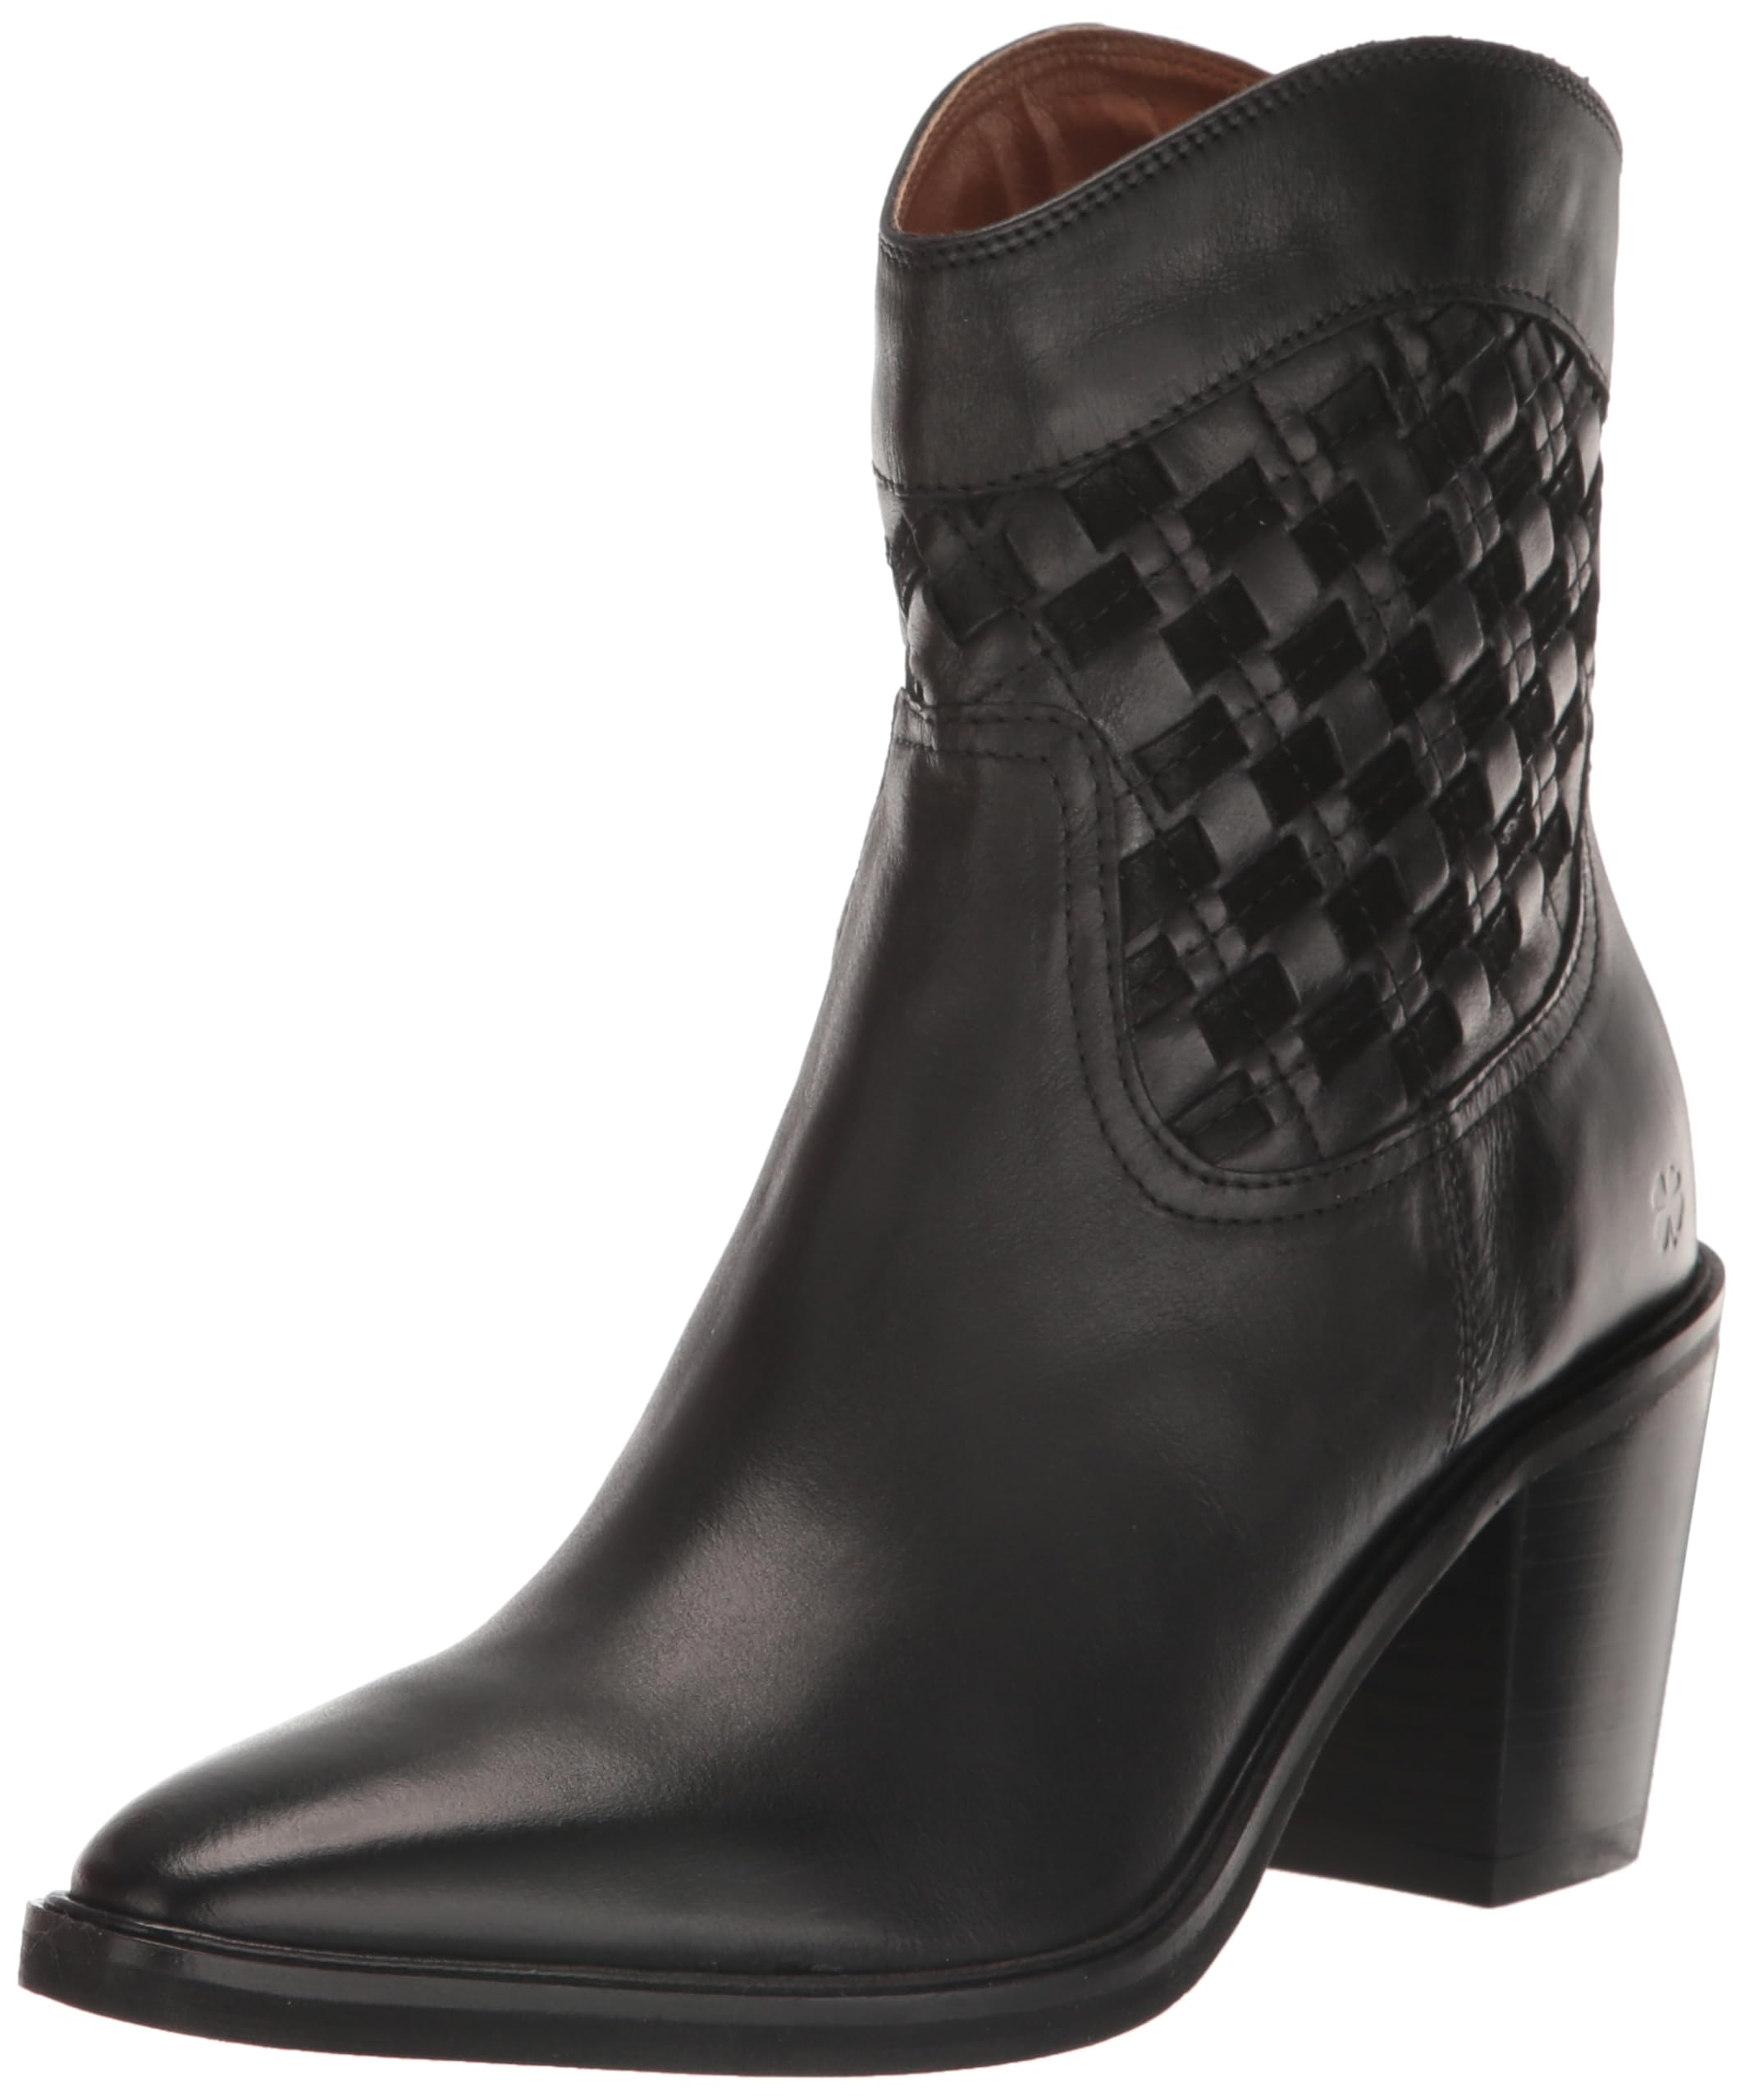 Lucky Brand Women's Aryleis Western Bootie Ankle Boot